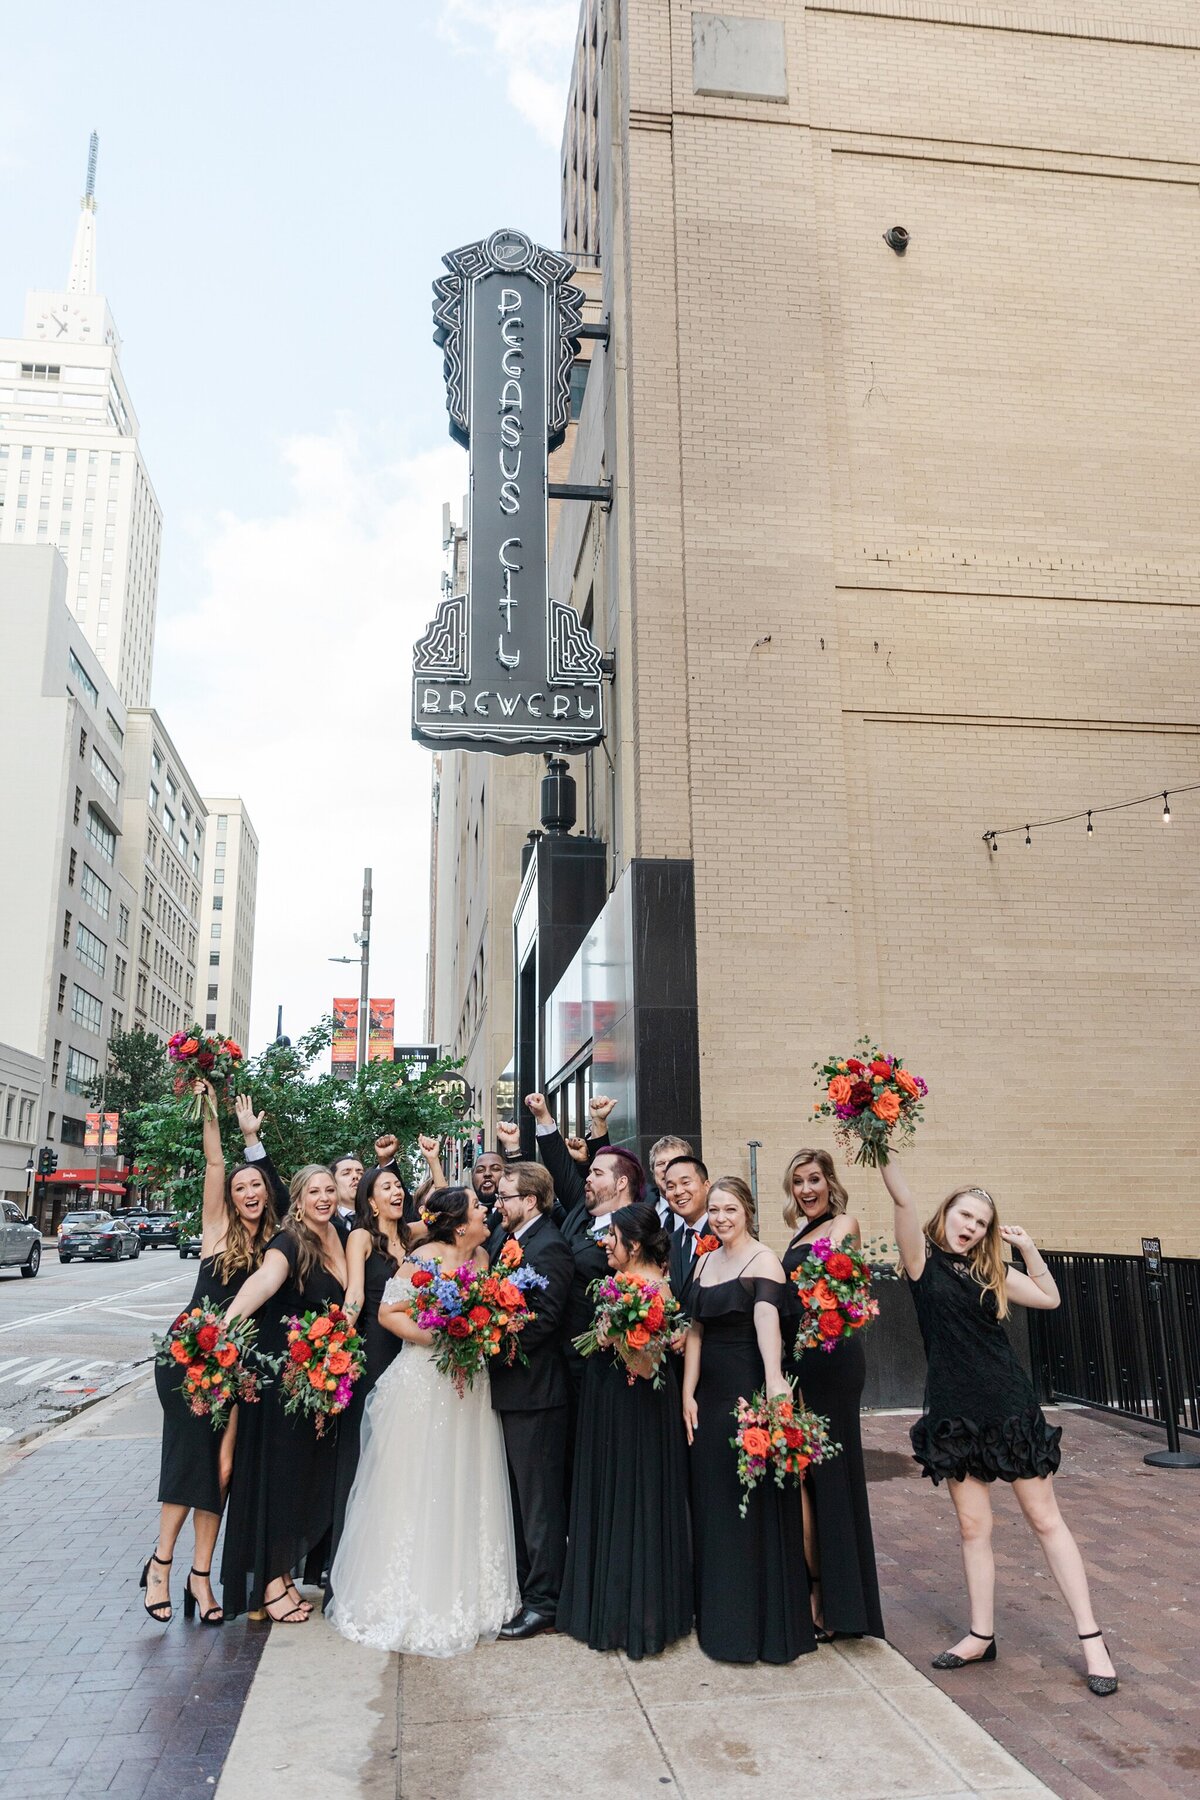 A portrait of a bride and groom looking joyfully at each other while backed by their wedding party who are cheering them on in celebration after their wedding ceremony at the Pegasus City Brewery in Dallas, Texas. The bride is on the left and is wearing a long, intricate, white dress and is holding a large bouquet. The groom is on the right and is wearing a black suit with a tie and boutonniere. The wedding party is wearing either black suits or black dresses with bouquets.